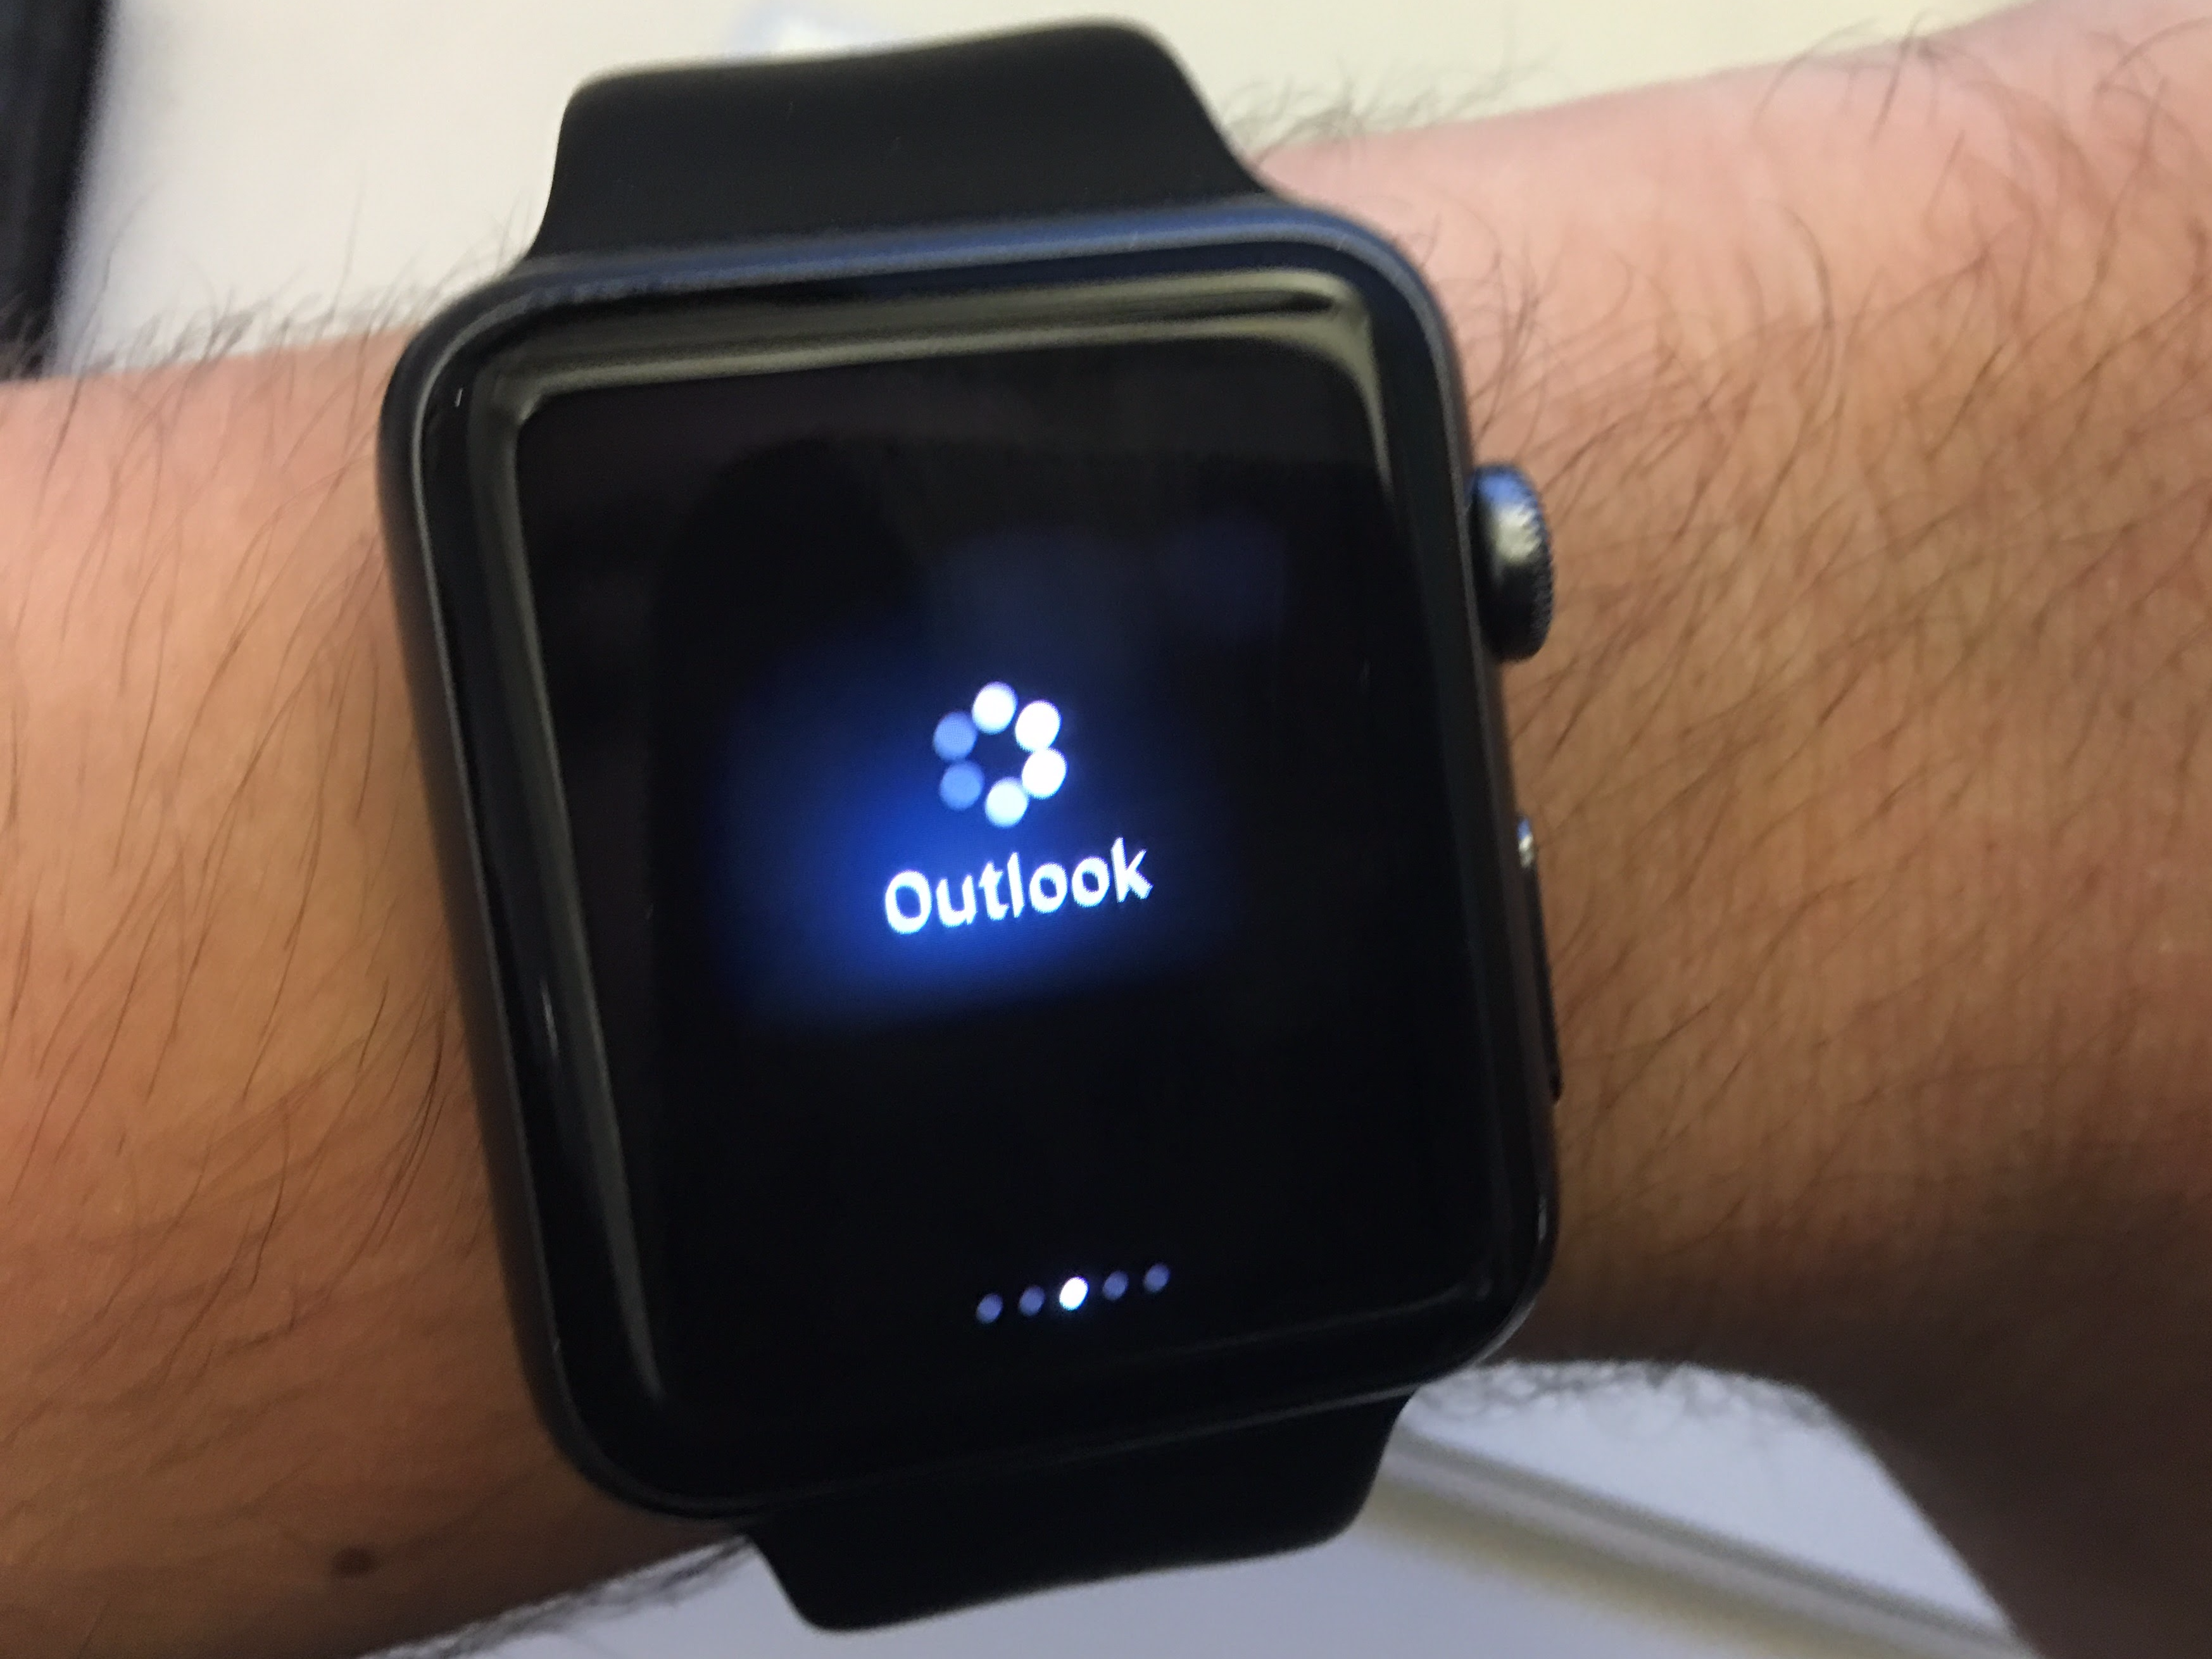 Apple Watch glance taking forever to load